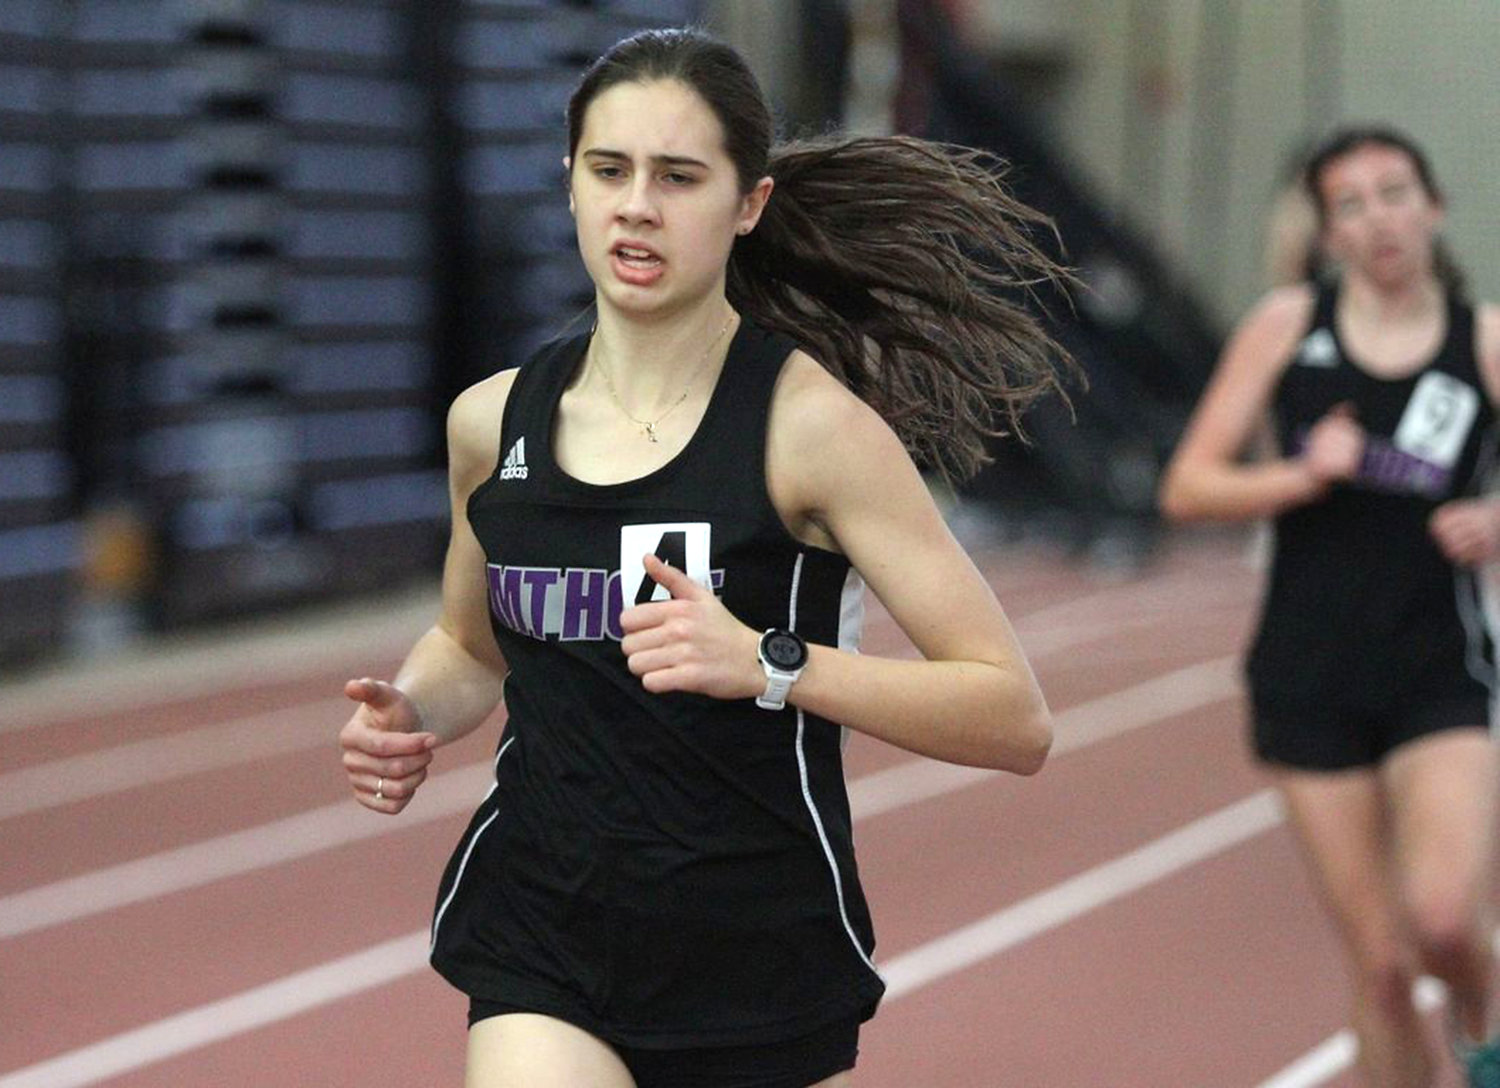 Freshman Jessica Deal running in the 1000 meter run, scored 26 points for Mt. Hope by placing first in the 3000 meter run and second in the 1000 and 1500 meter runs.